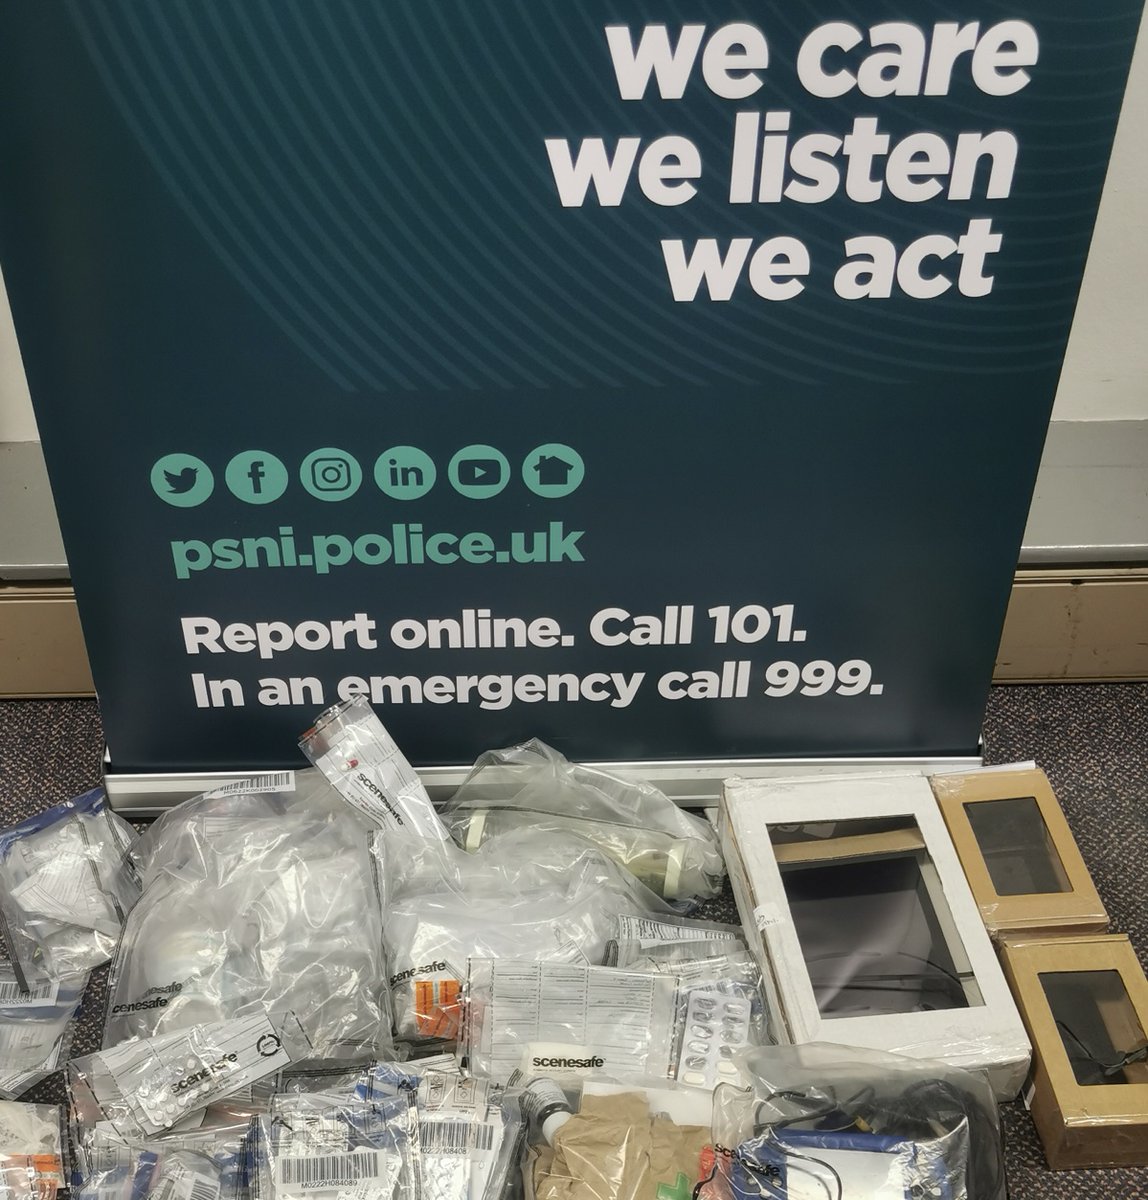 Suspected Class A, B & C drugs with an estimated street value of £17,000 & a sum of suspected counterfeit cash, was seized by Waterside Neighbourhood officers in the Waterside yesterday (14/5). 3 people arrested were bailed to allow for further police enquiries. #OpDealbreaker